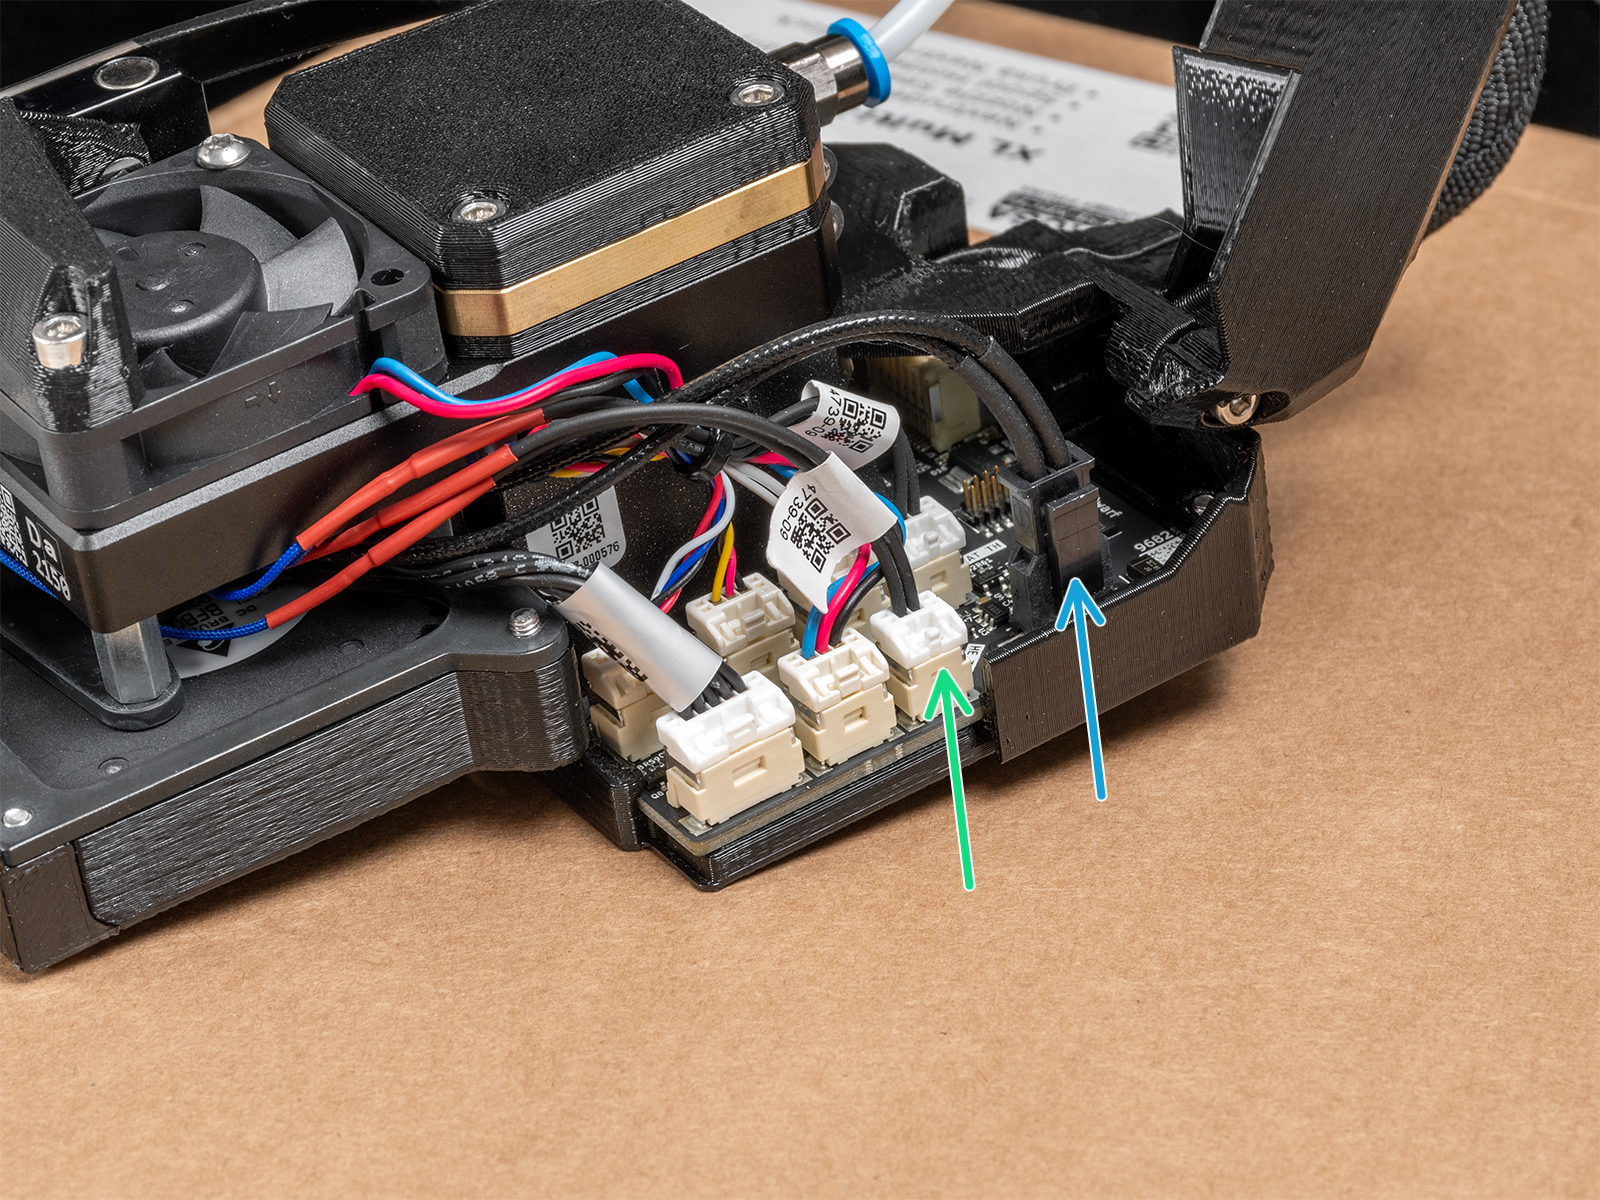 Disconnecting the hotend